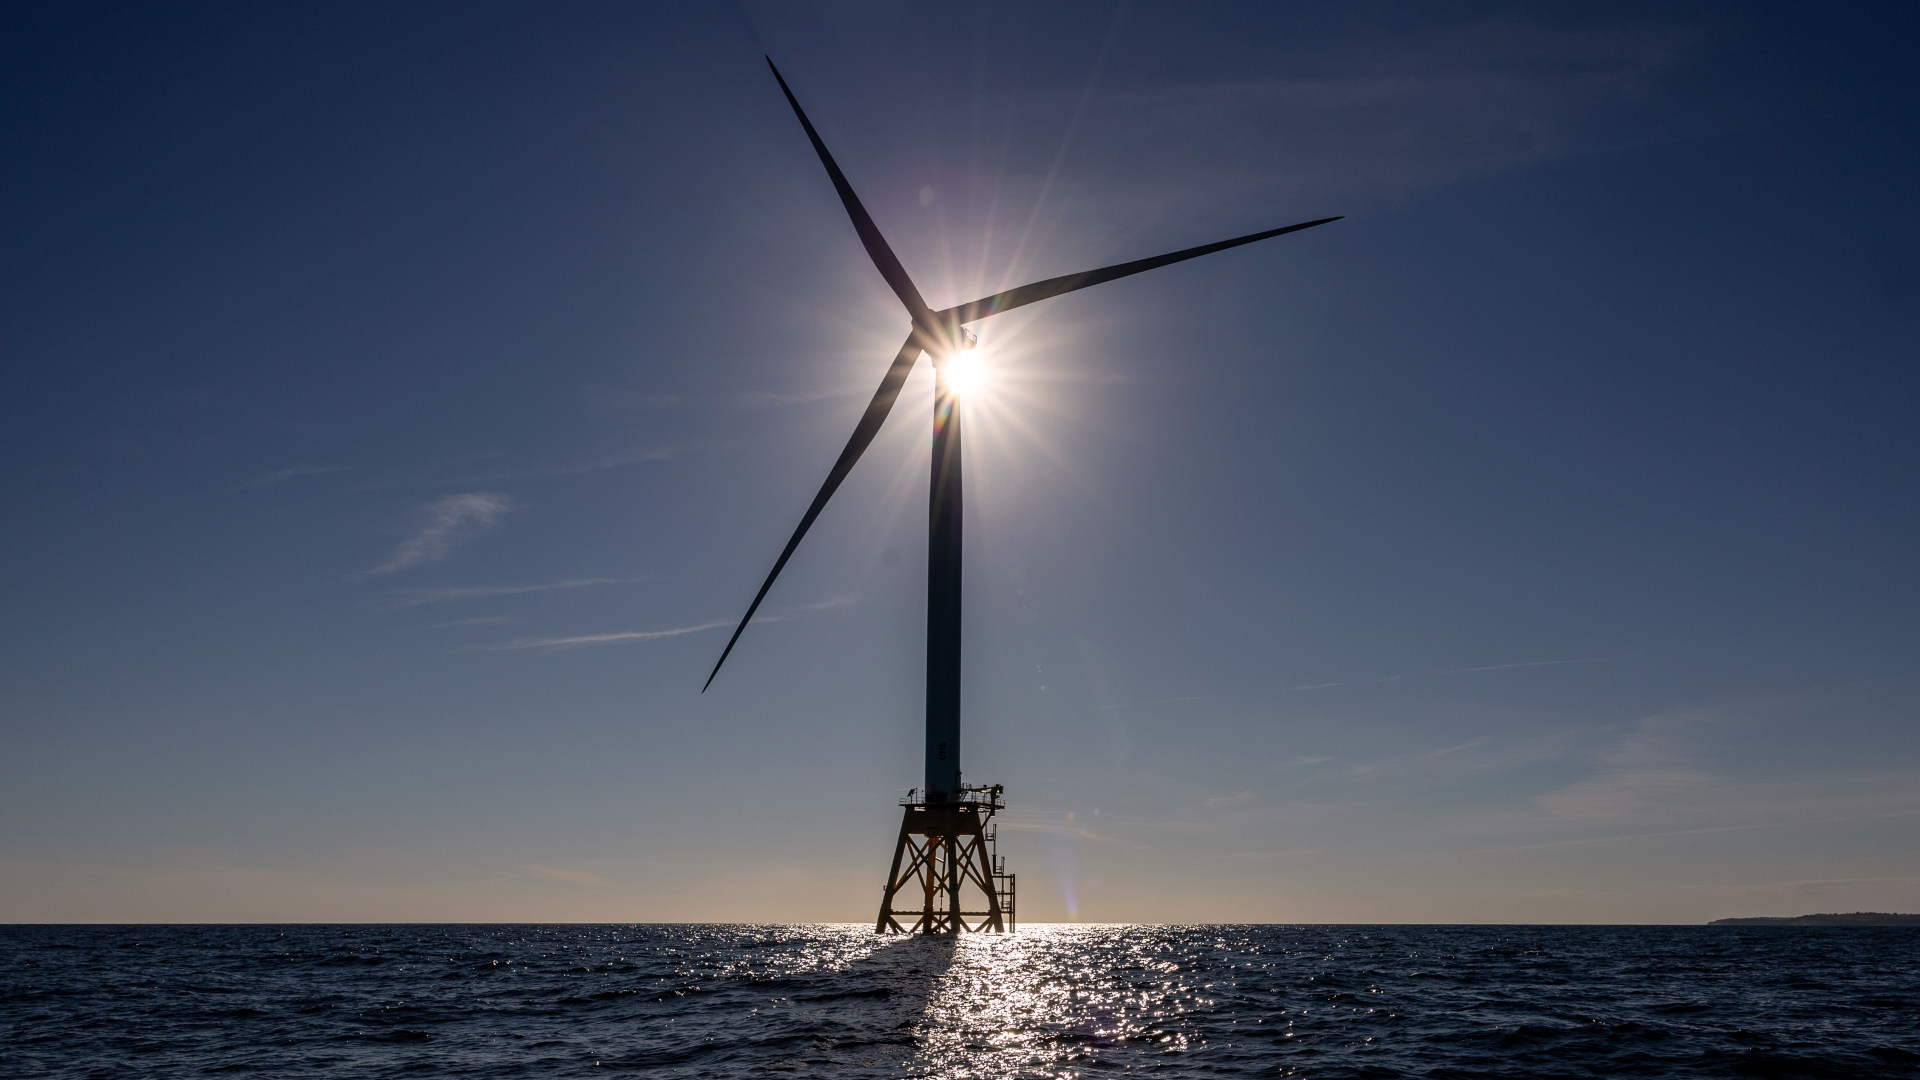 In July 2022, off the coast of Rhode Island, a wind turbine generates electricity at the Block Island Wind Farm, the first commercial offshore wind farm in the United States.